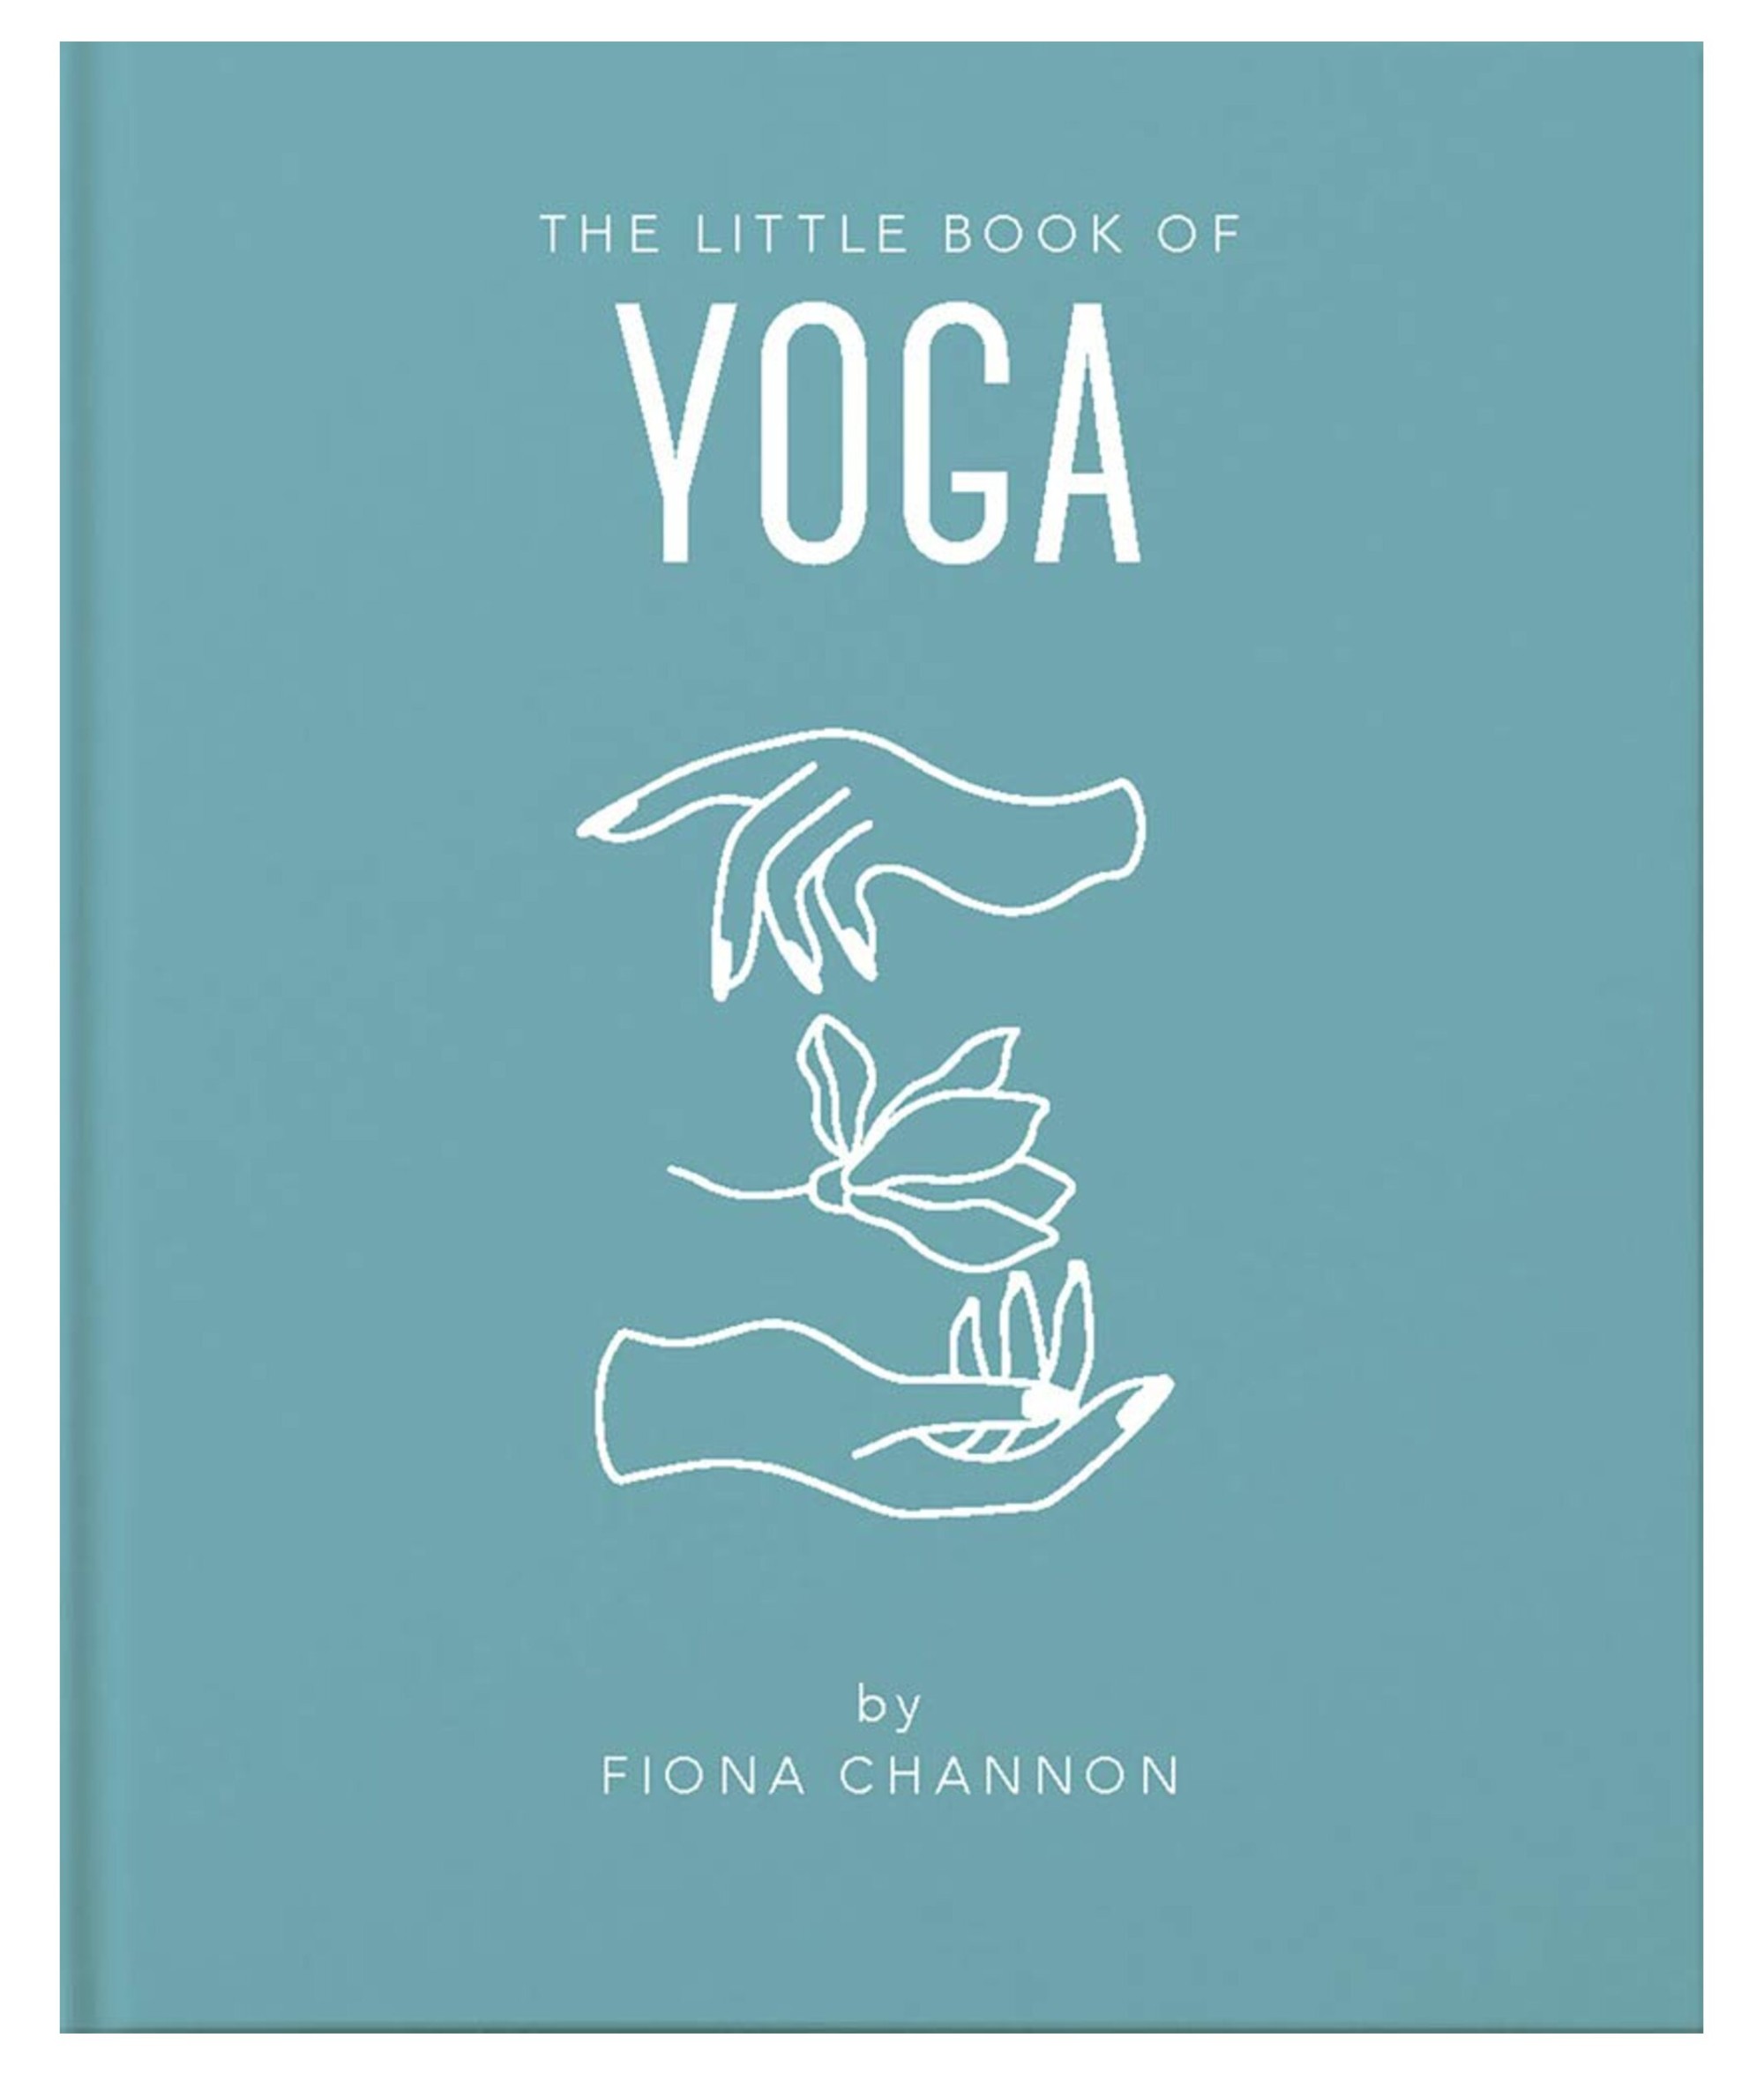 Little Book of Yoga  Cancer Research UK Online Shop